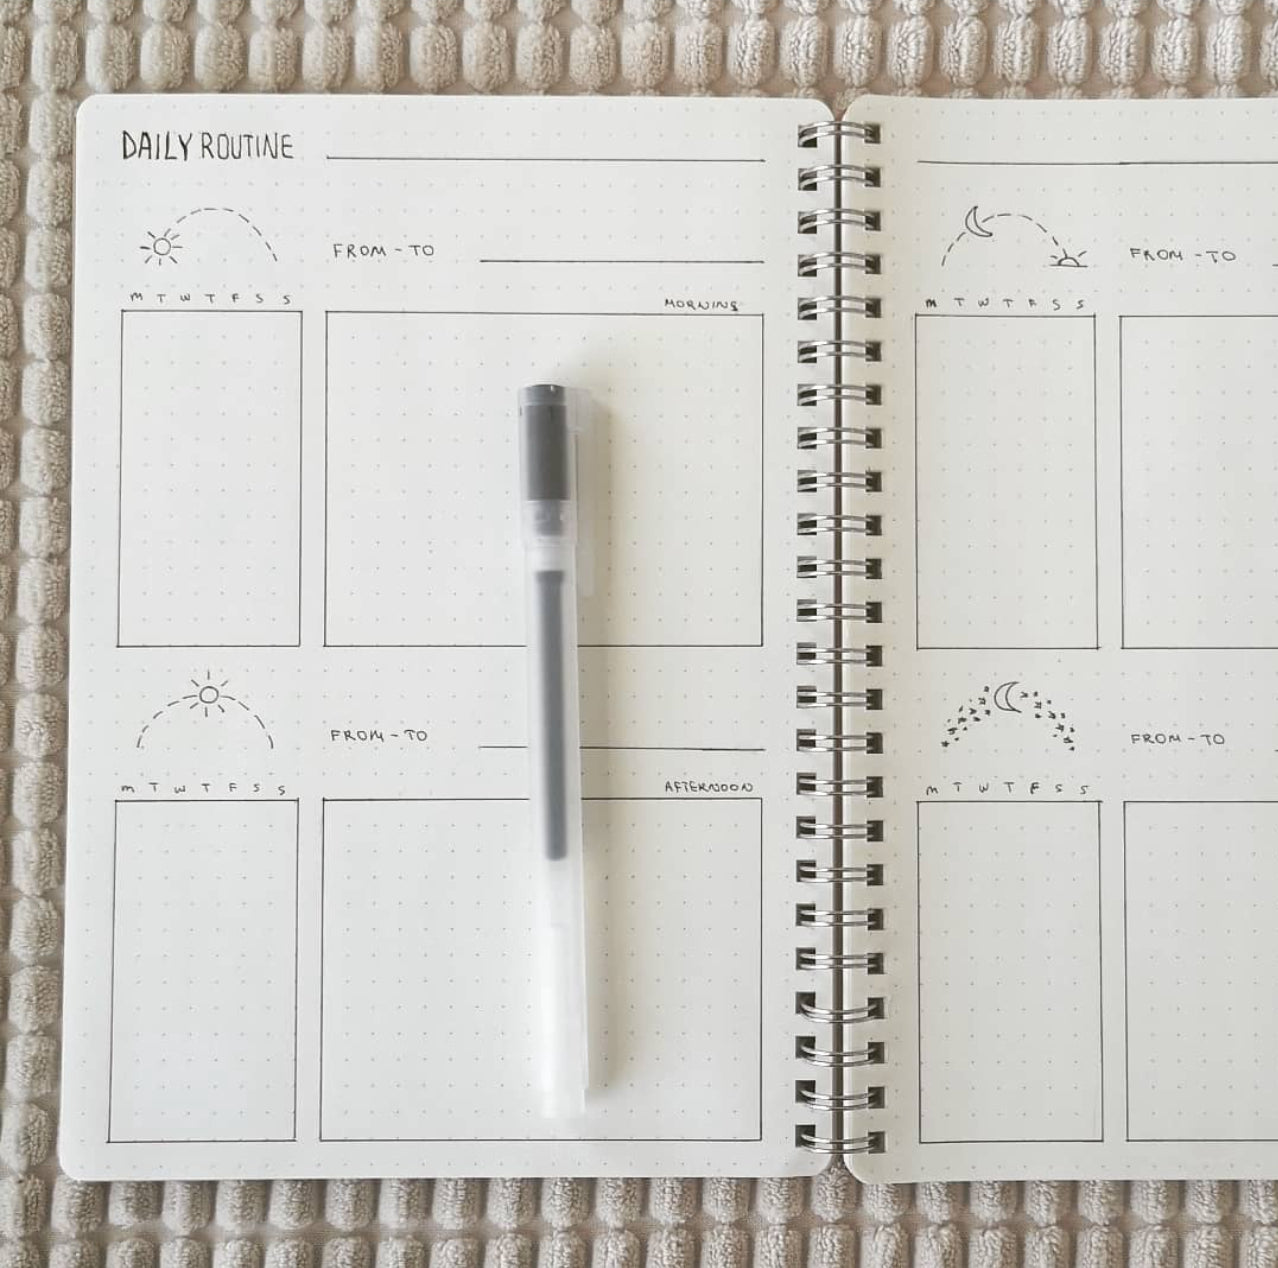 My first daily routine planner was written in a Bullet journal.